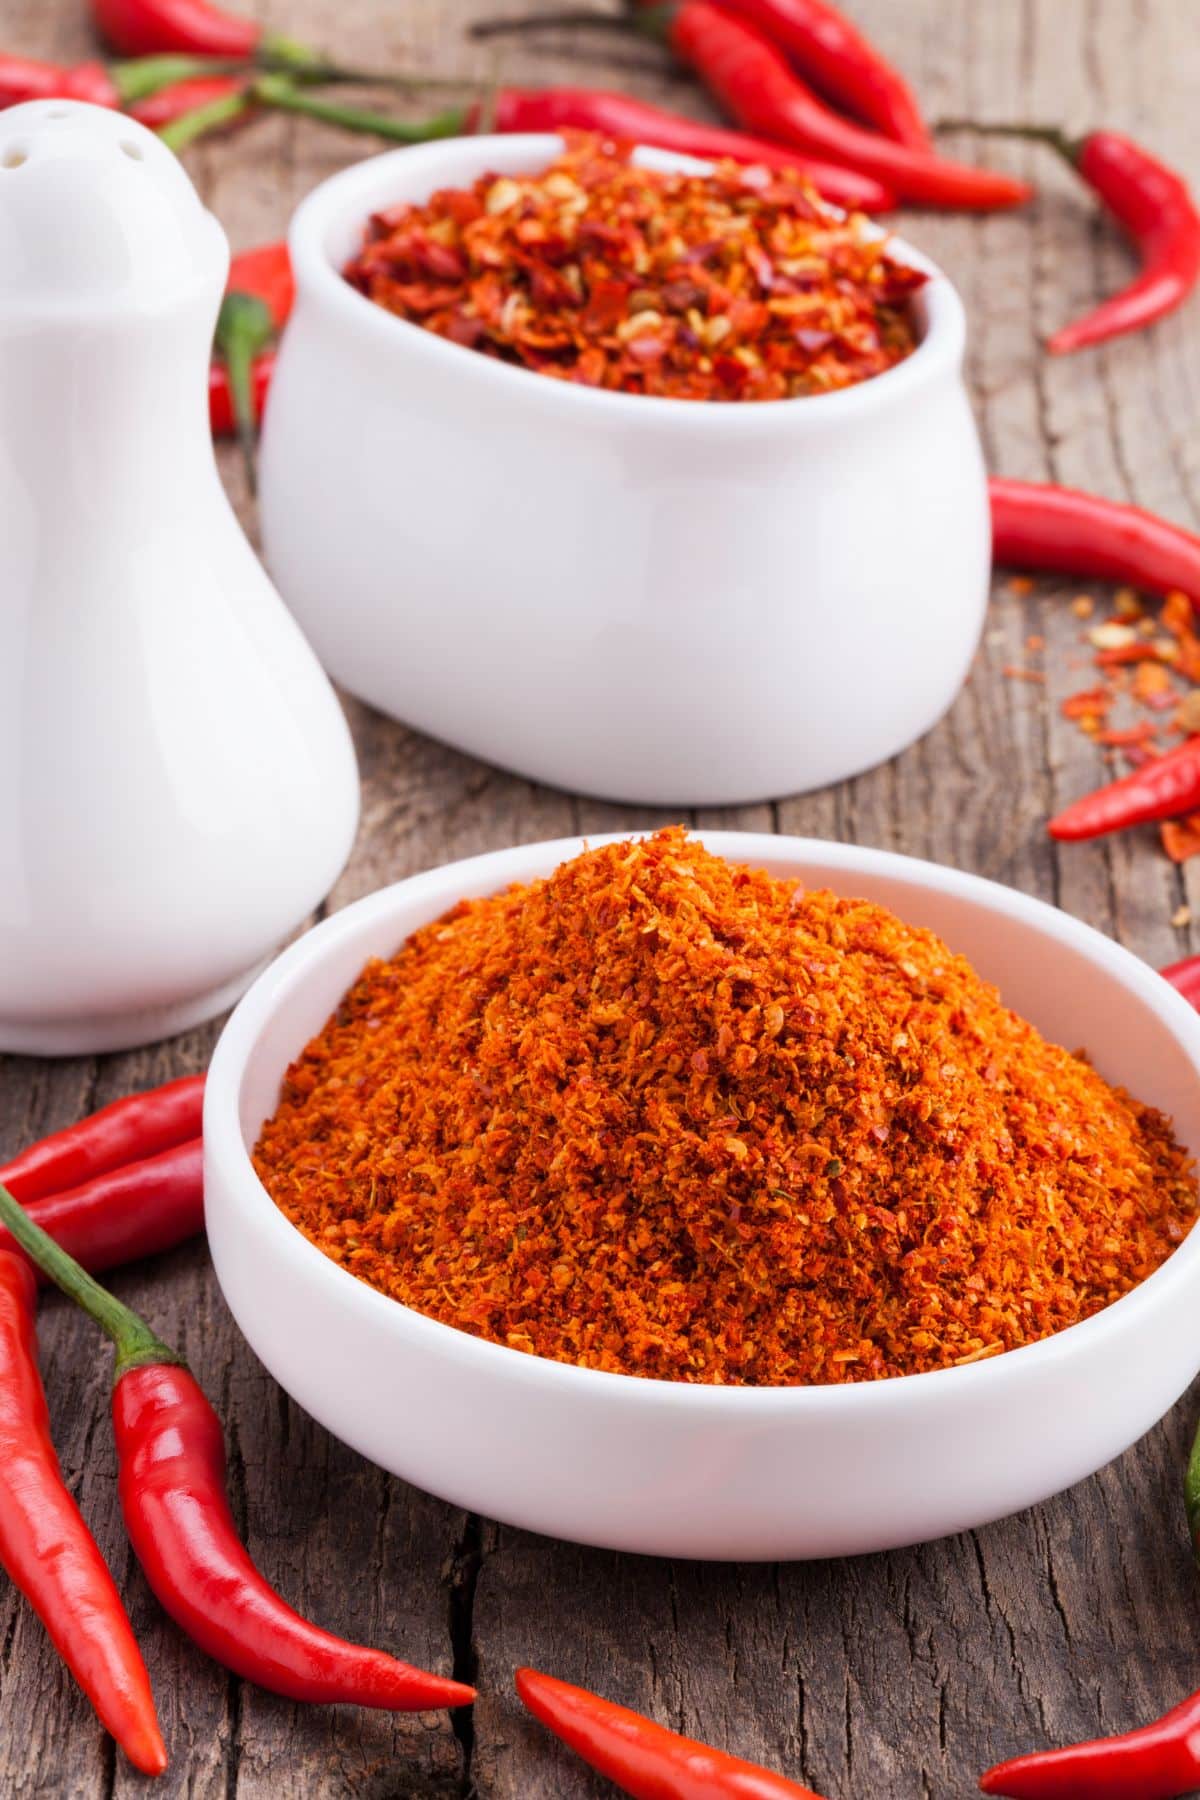 Bowl of chili powder with wooden surface and chili peppers.